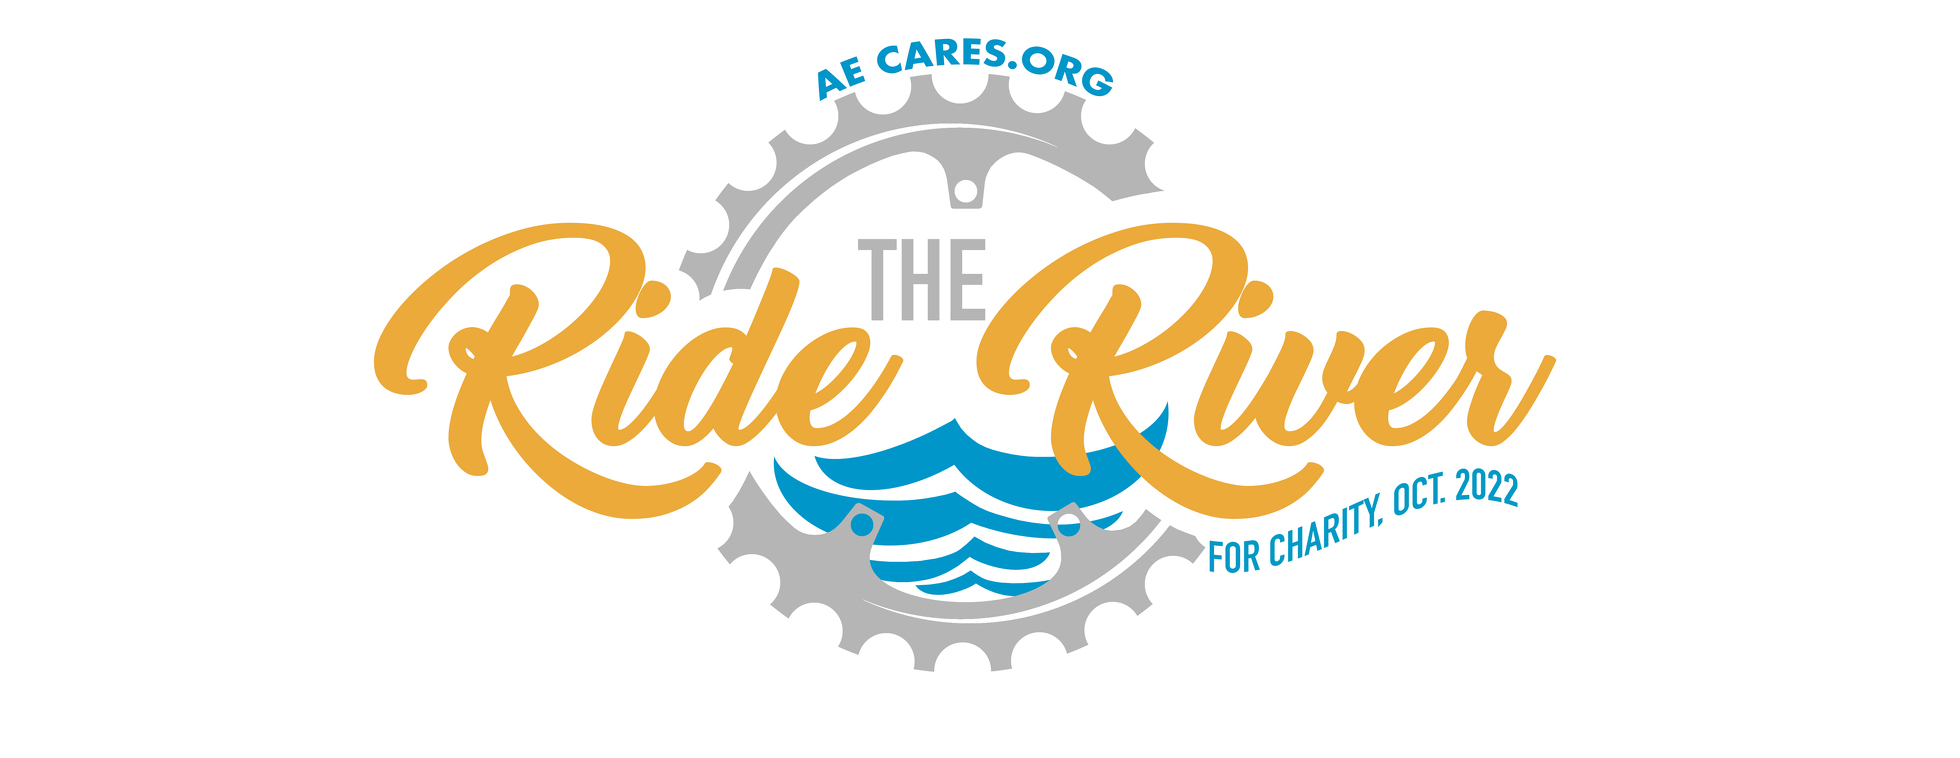 AE Cares 1st Annual Ride The River Charity Event